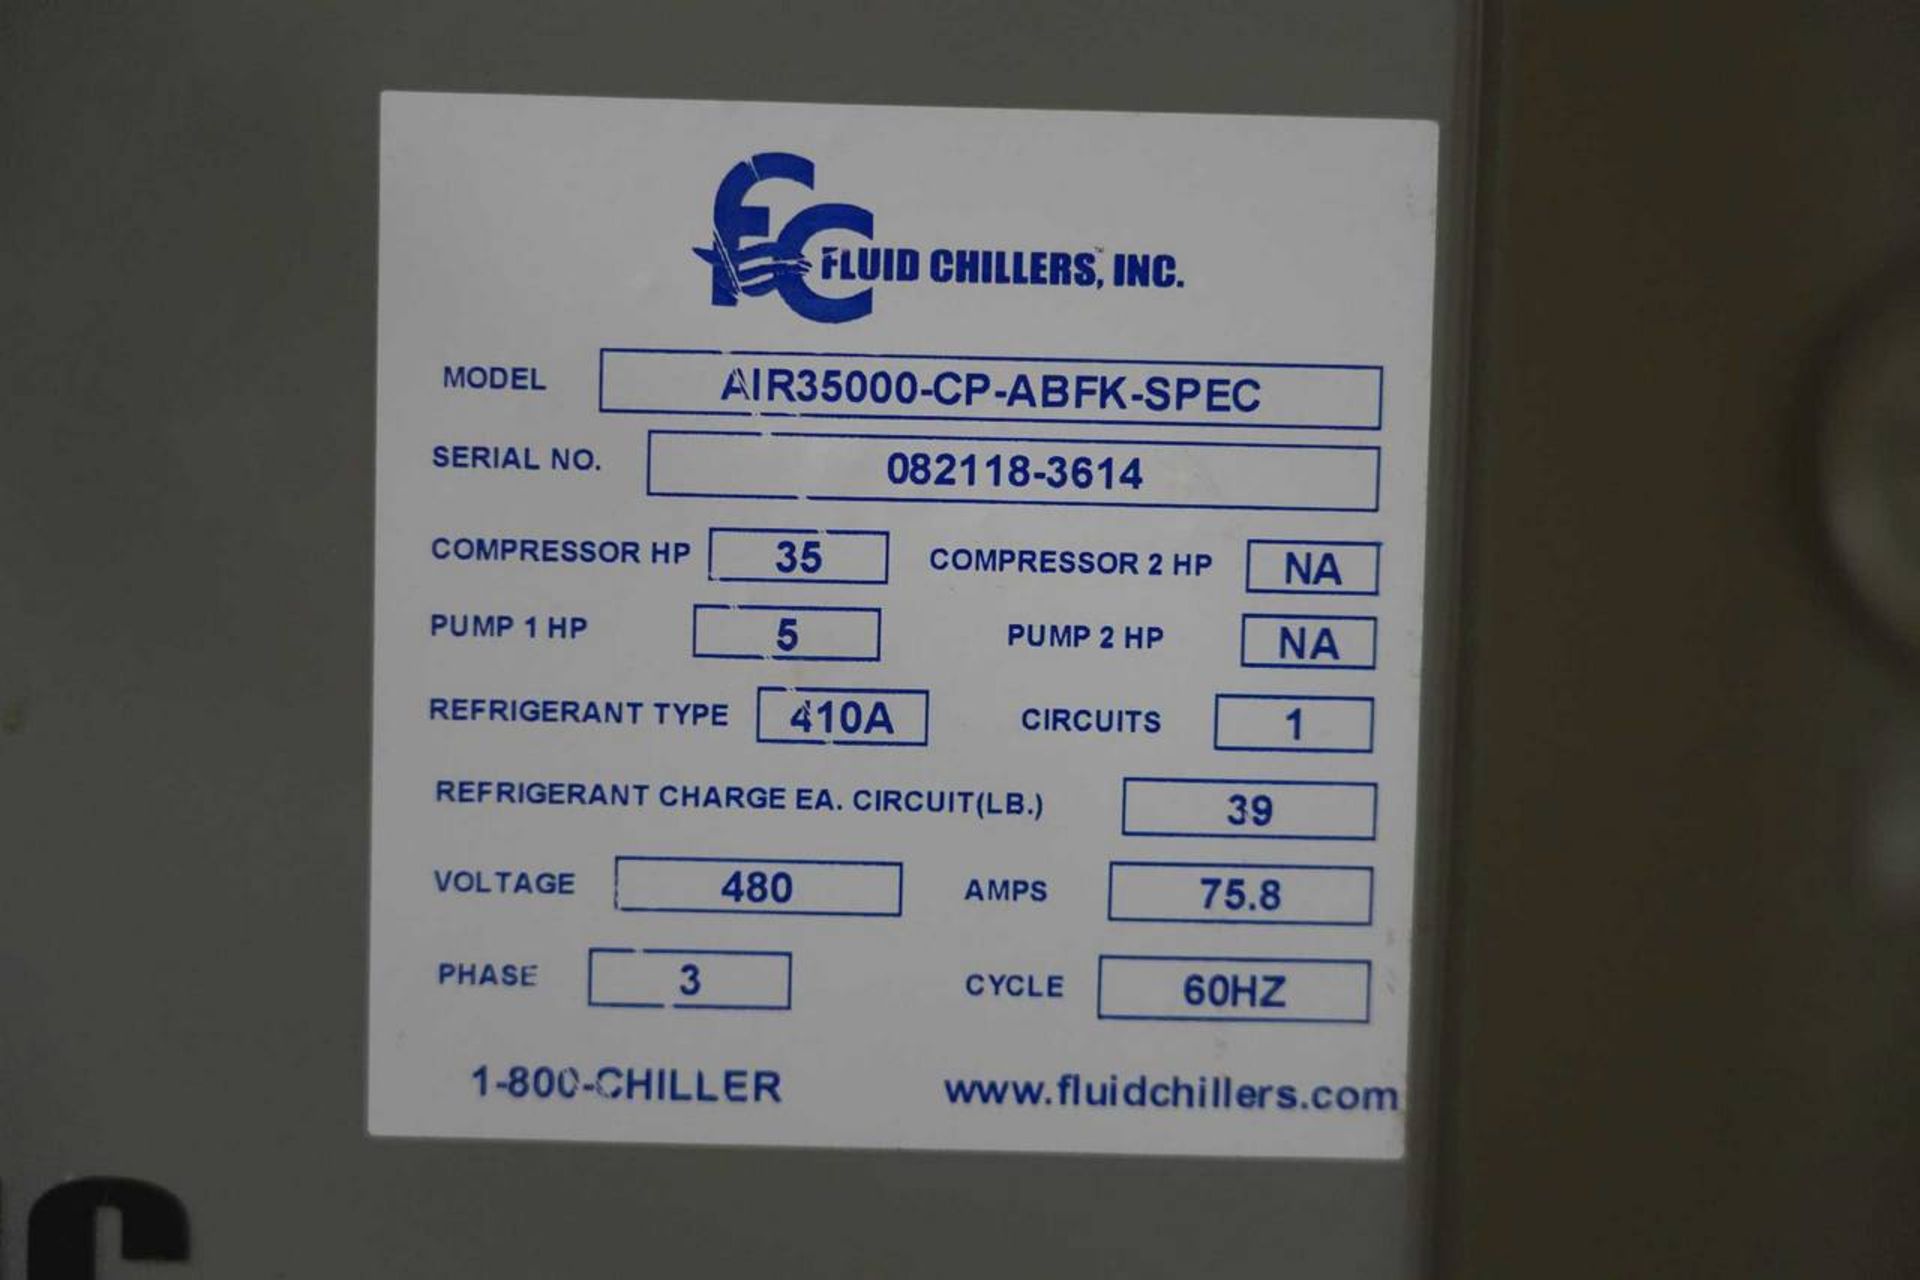 2019 Fluid Chillers Air35000_CP-ABFK-SPEC Chiller Unit - Image 7 of 7